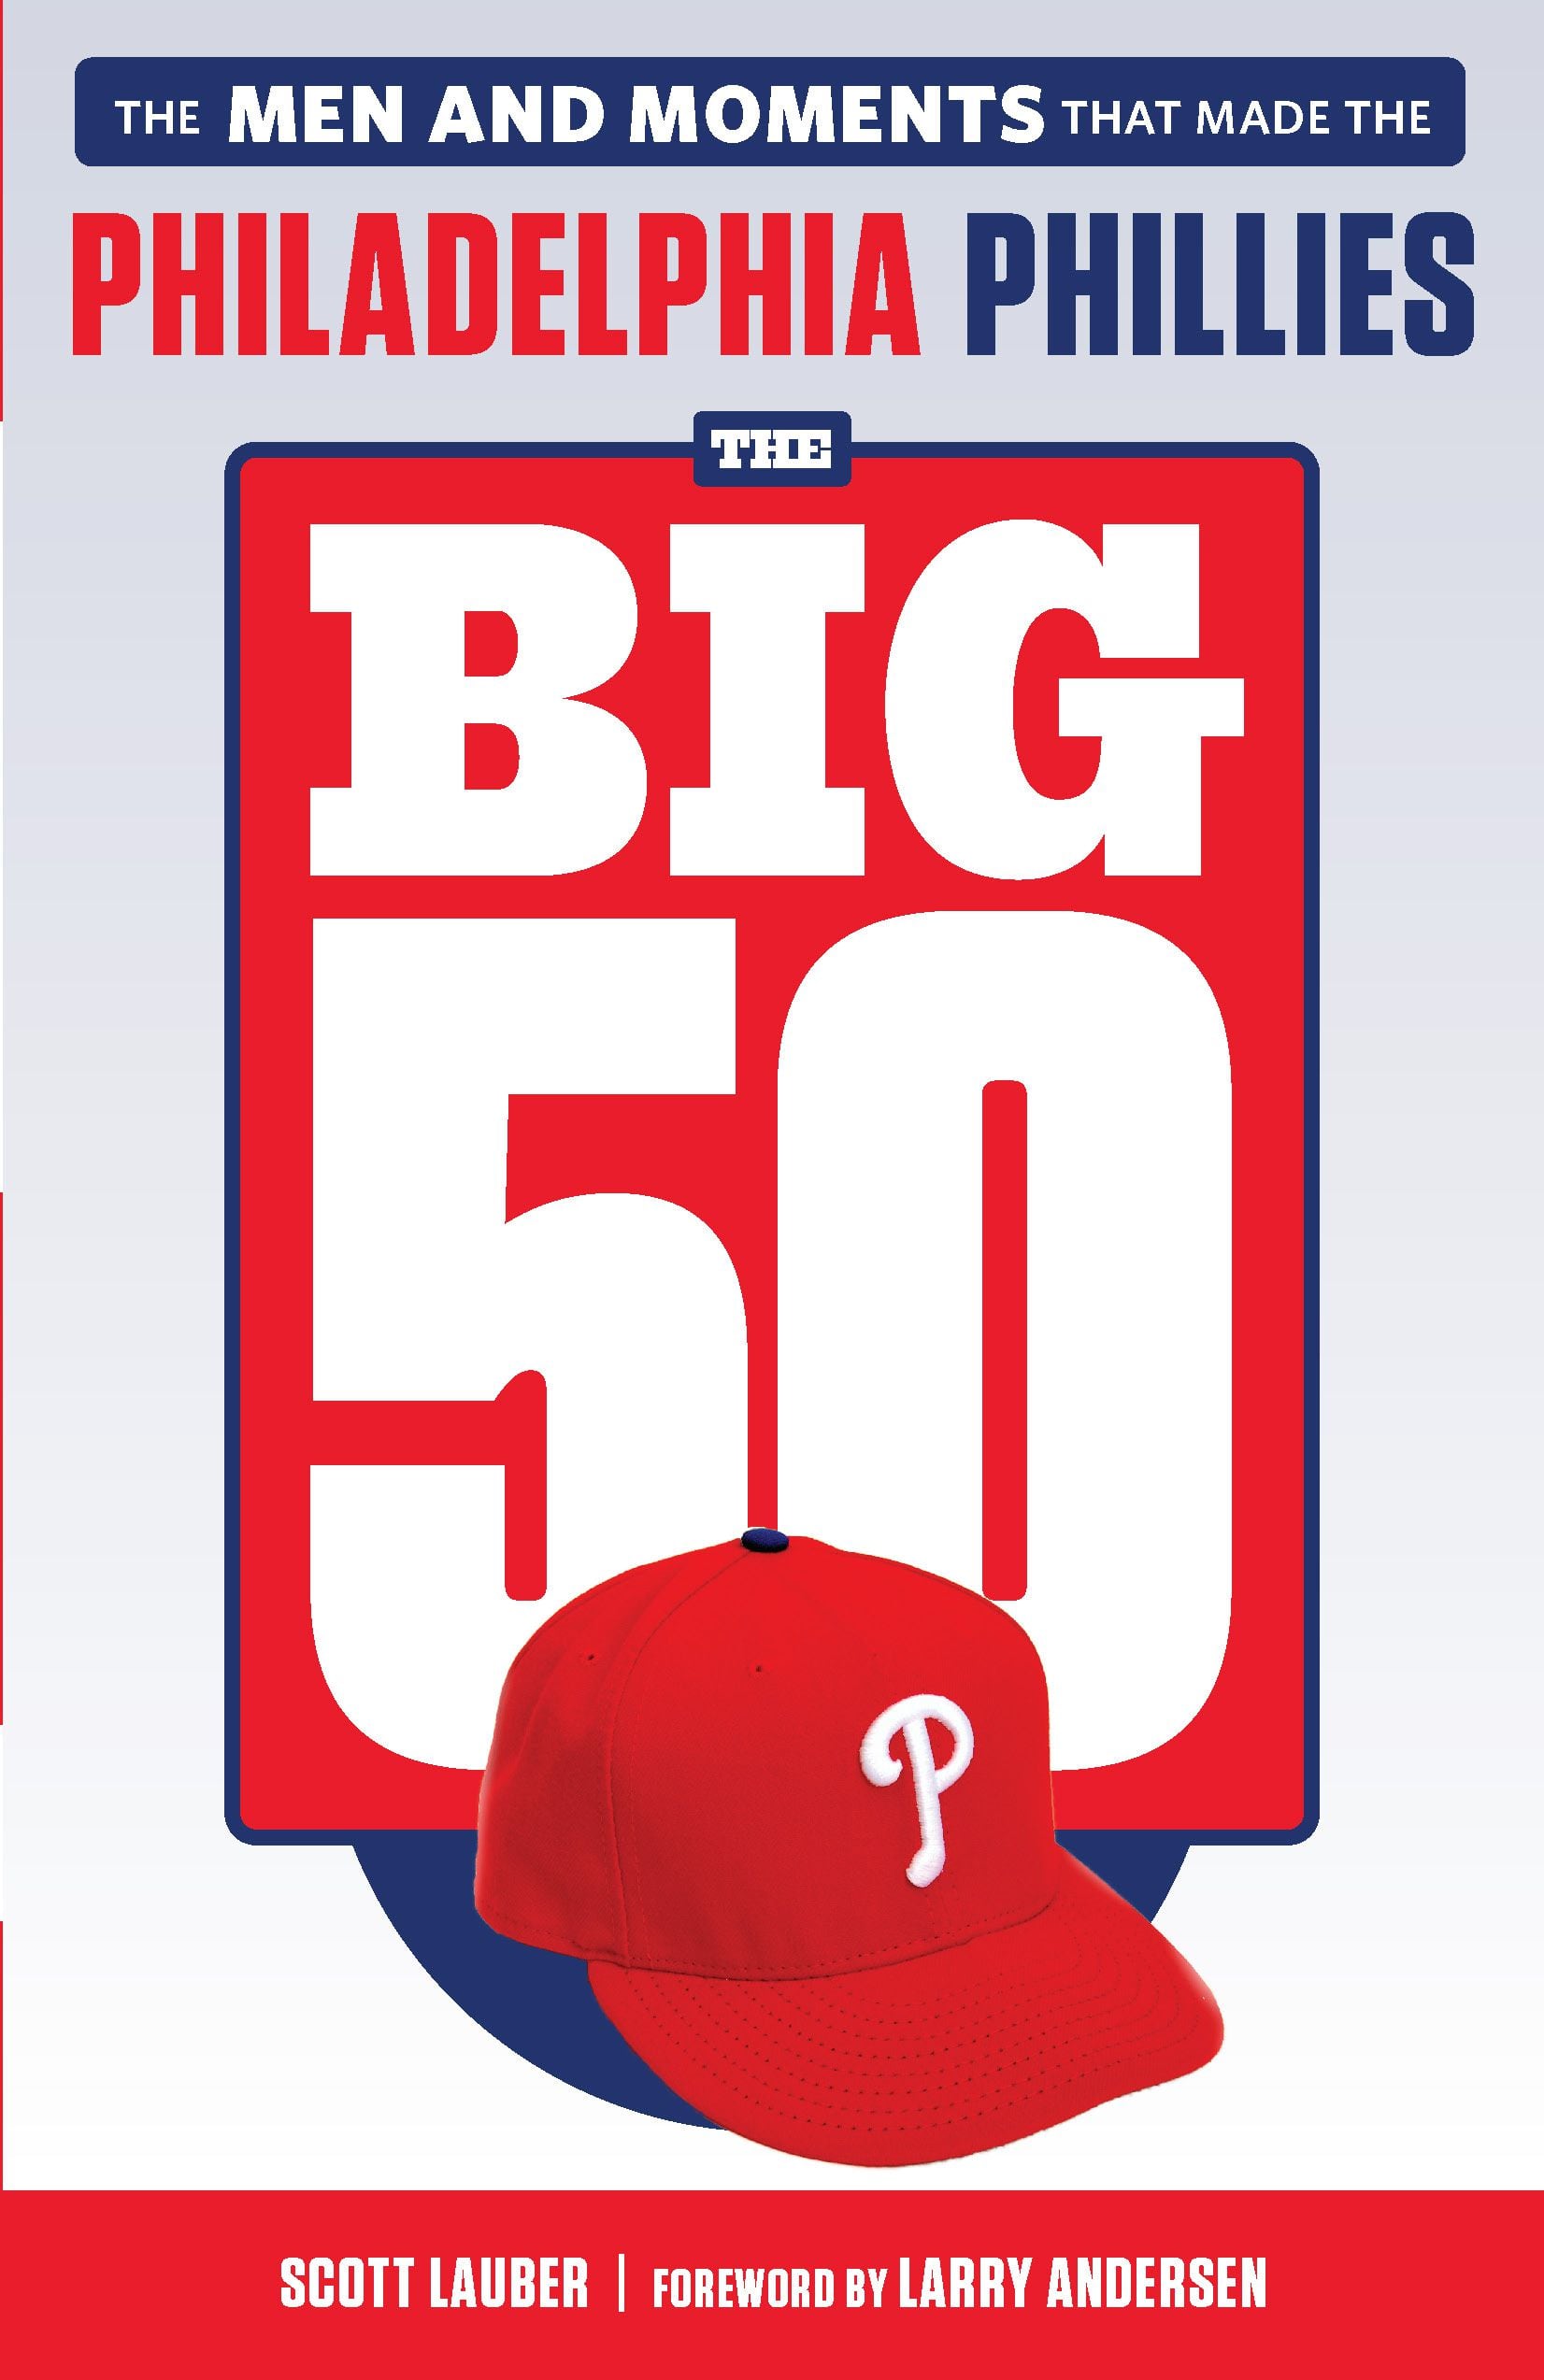 Phillies Nation Book Club Event with Tommy Greene  Phillies Nation - Your  source for Philadelphia Phillies news, opinion, history, rumors, events,  and other fun stuff.